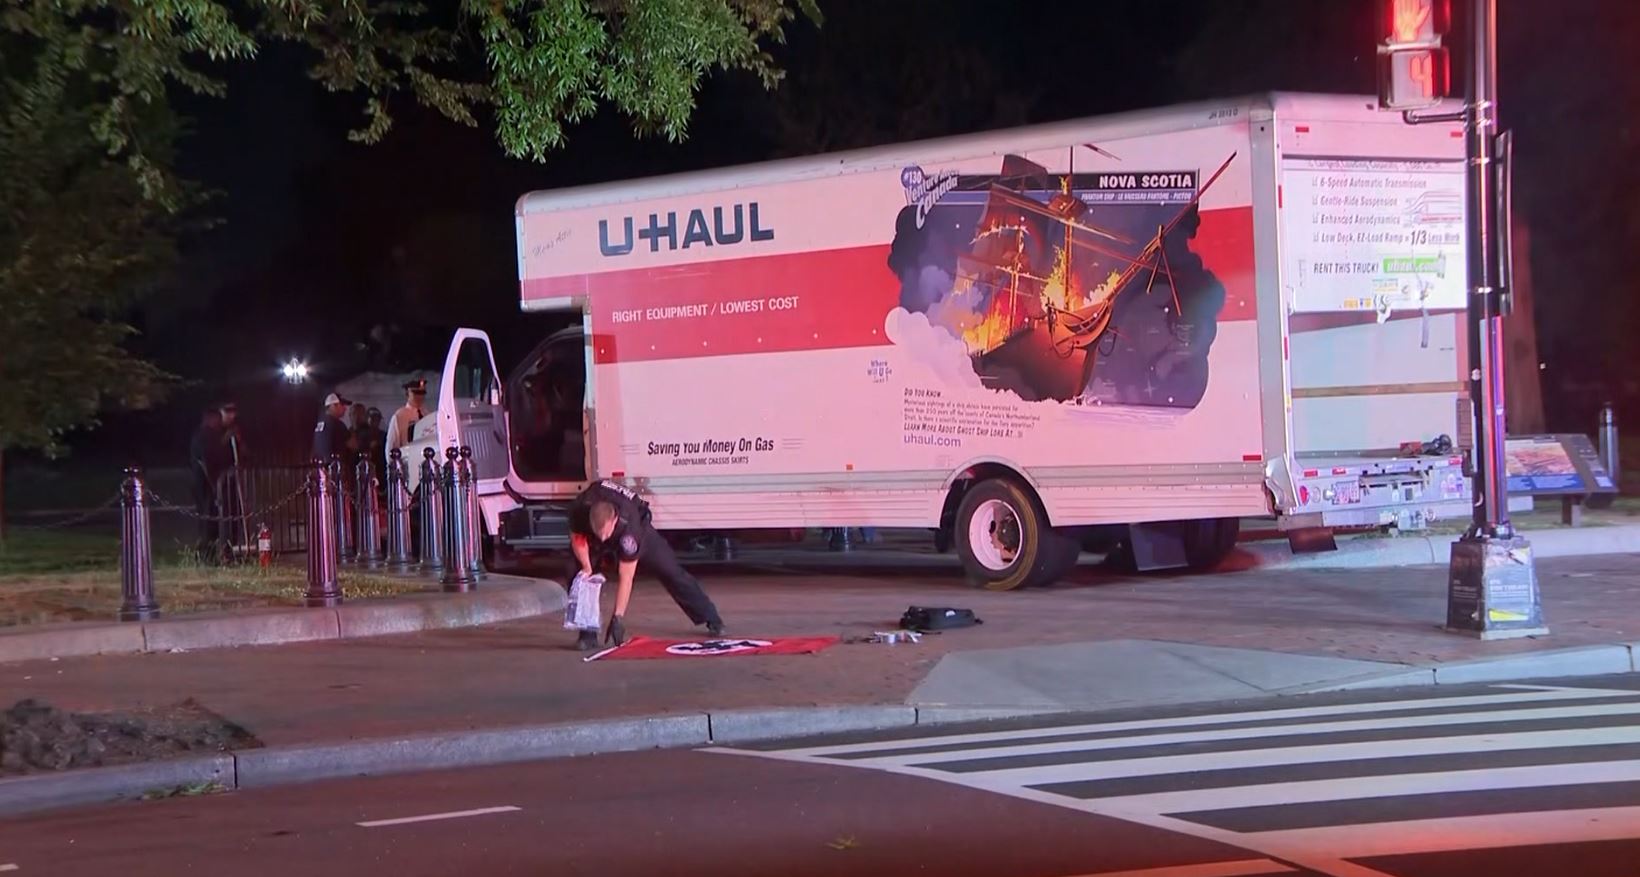 Police investigate a U-Haul truck that tried to get close to the White House. It crashed at Lafayette Park, adjacent to the White House.